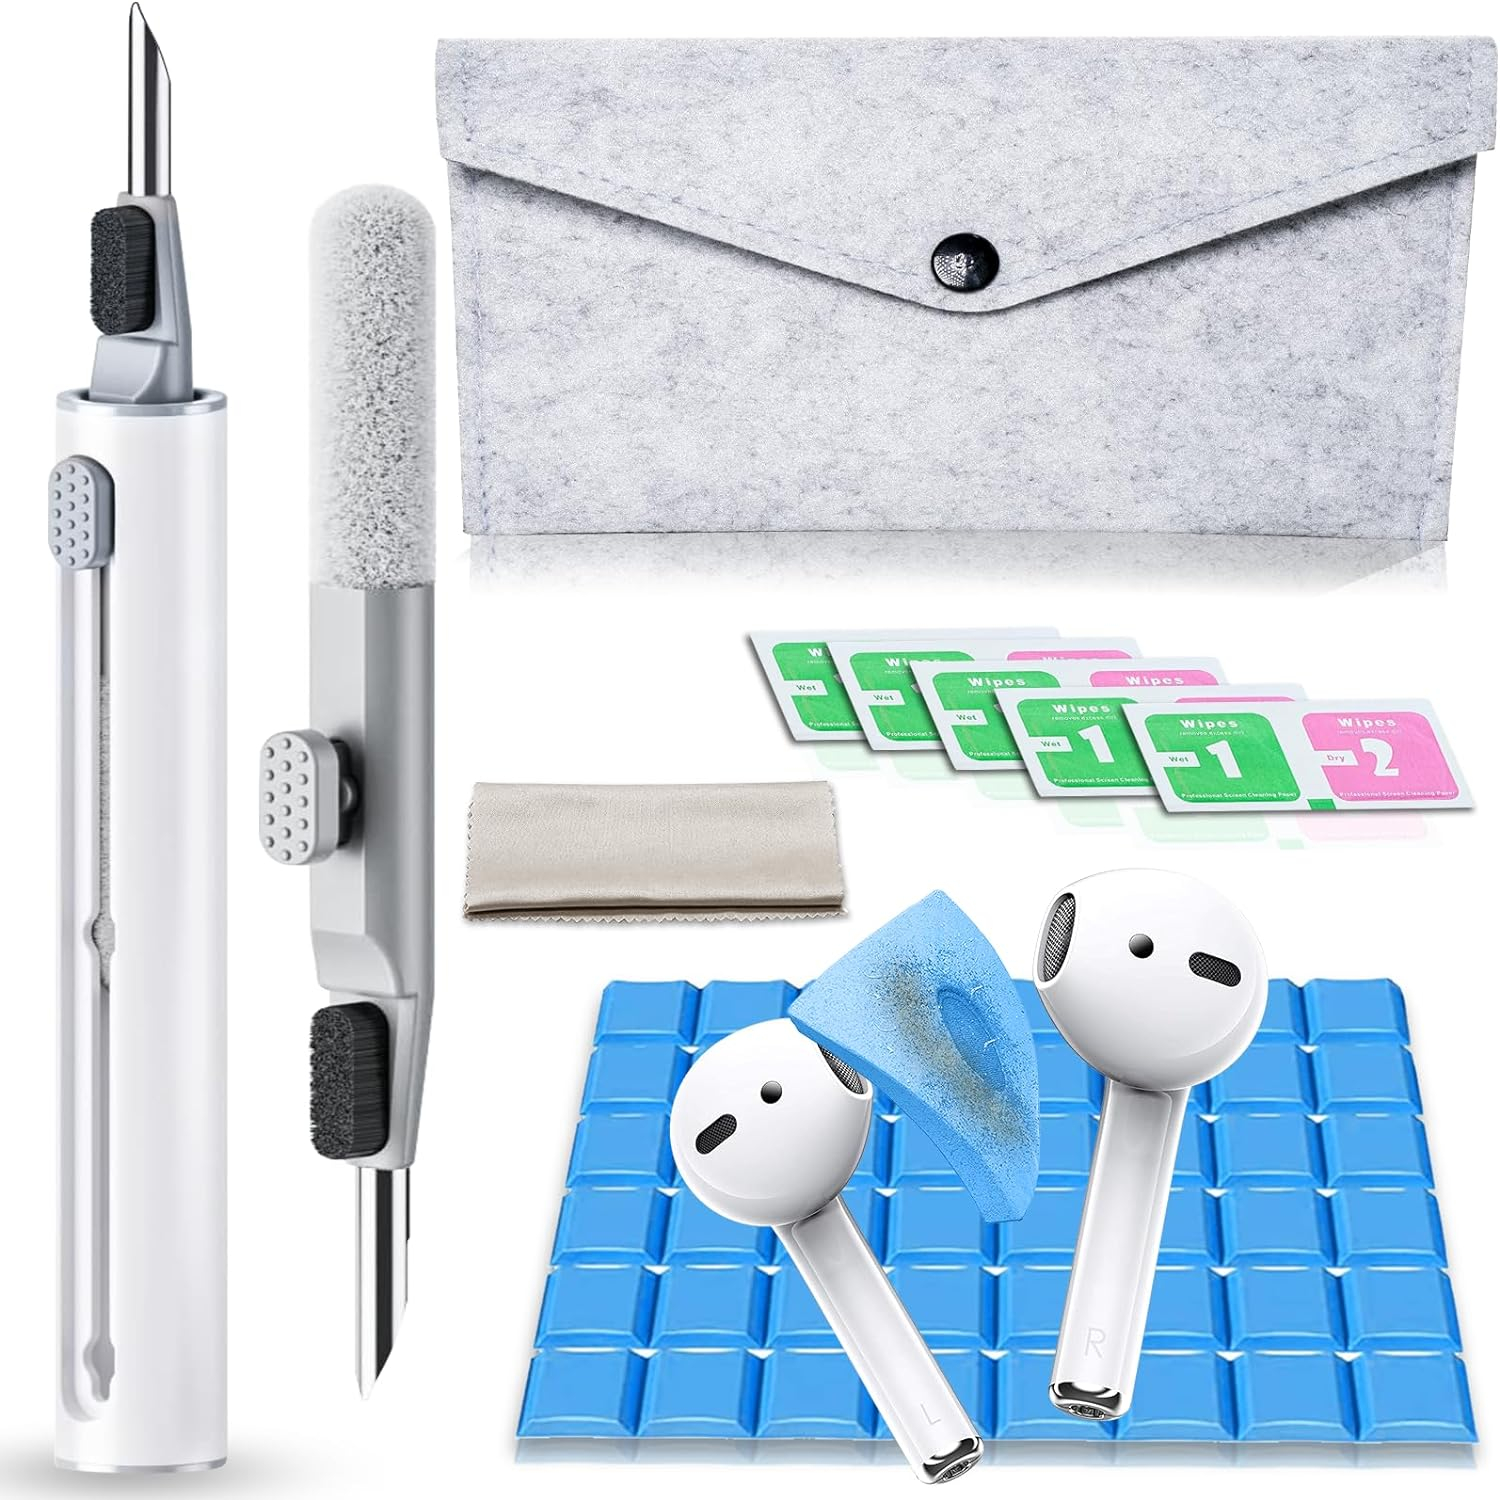 AKIKI Cleaner Kit for Airpods, Earbuds Cleaning kit for Airpods Pro 1 2 3, Phone Cleaner kit with Brush for Bluetooth Earbuds Cleaner, Wireless Earphones,iPhone,Laptop, Camera (White2) SB-11